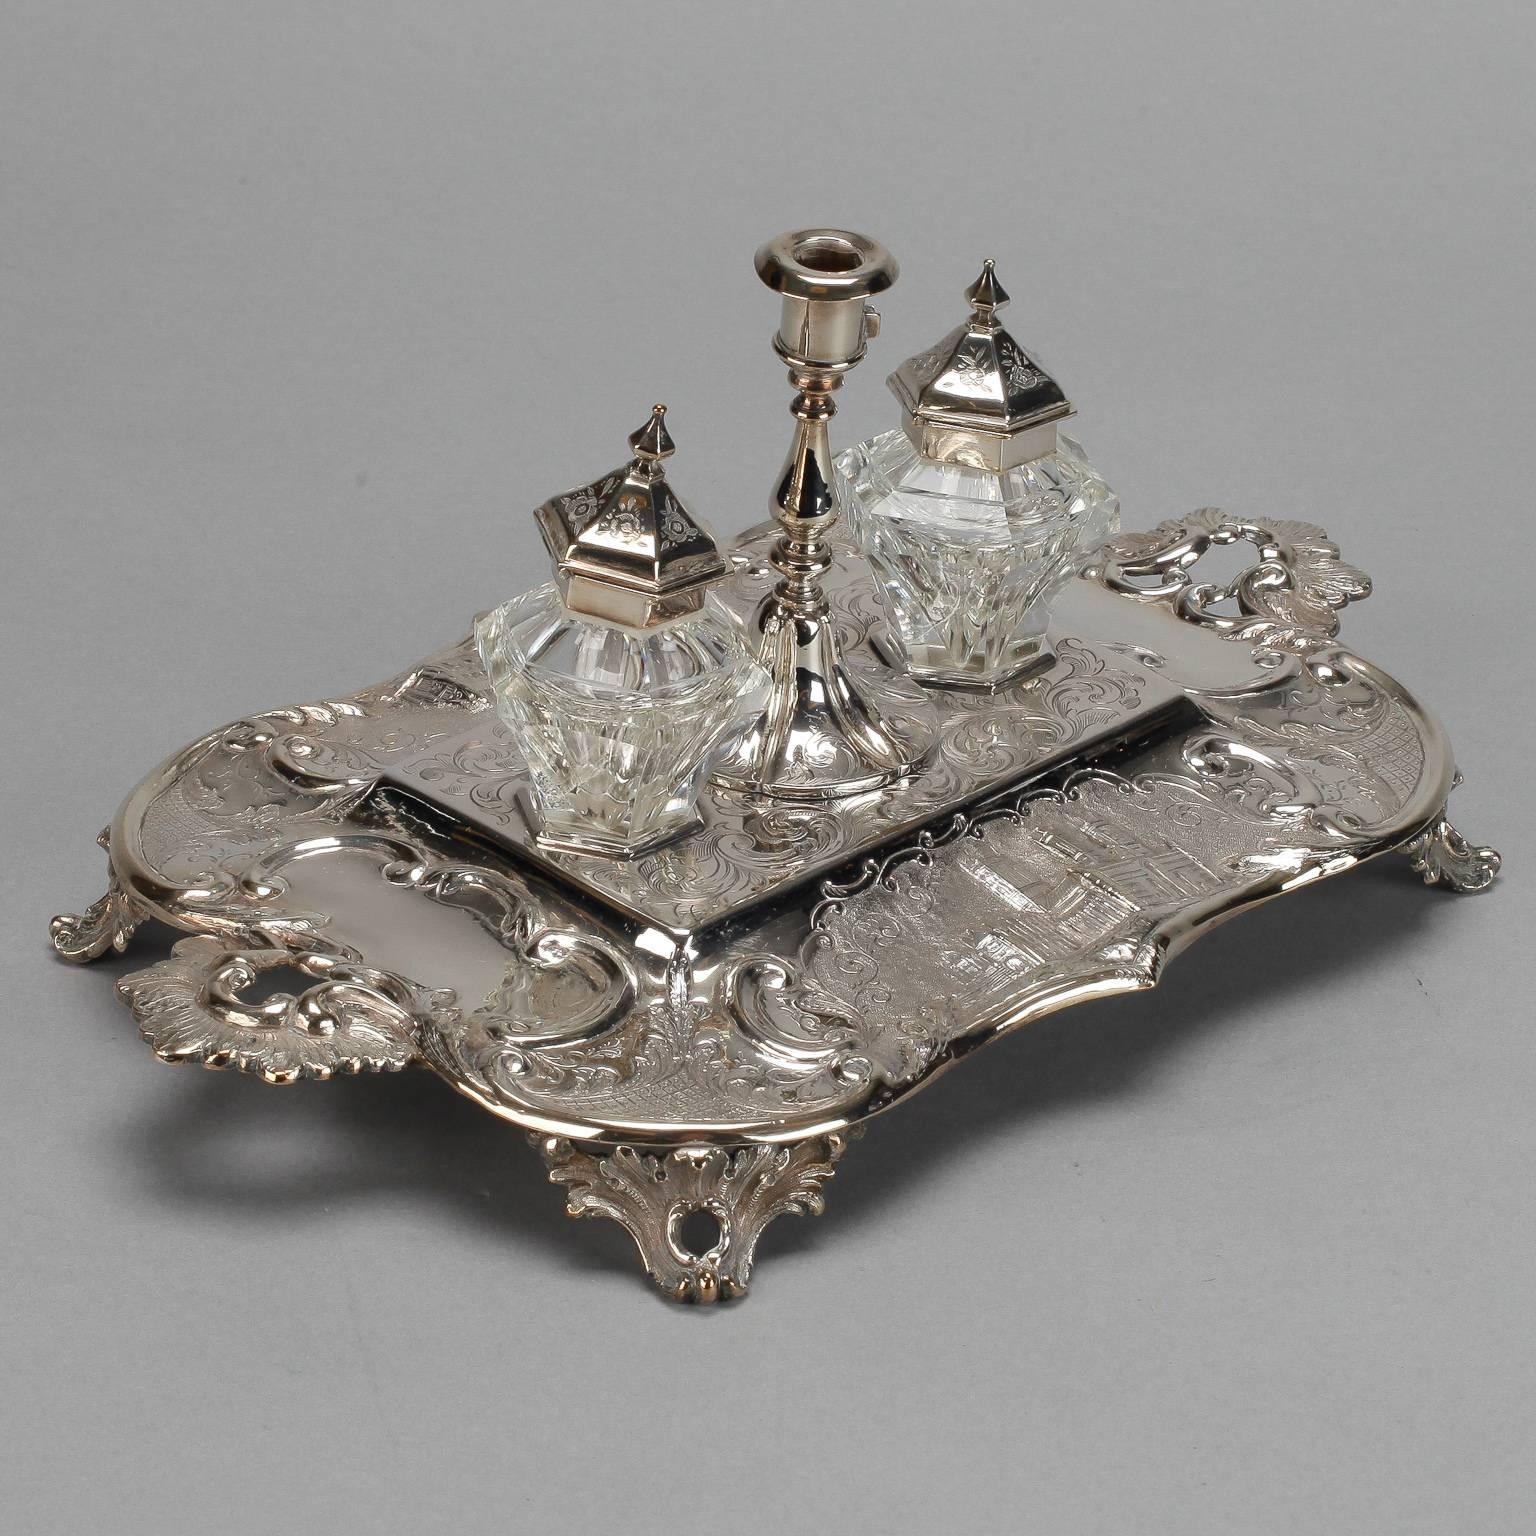 19th Century Large Silver Plated Inkwell with Bottles and Candle Holder